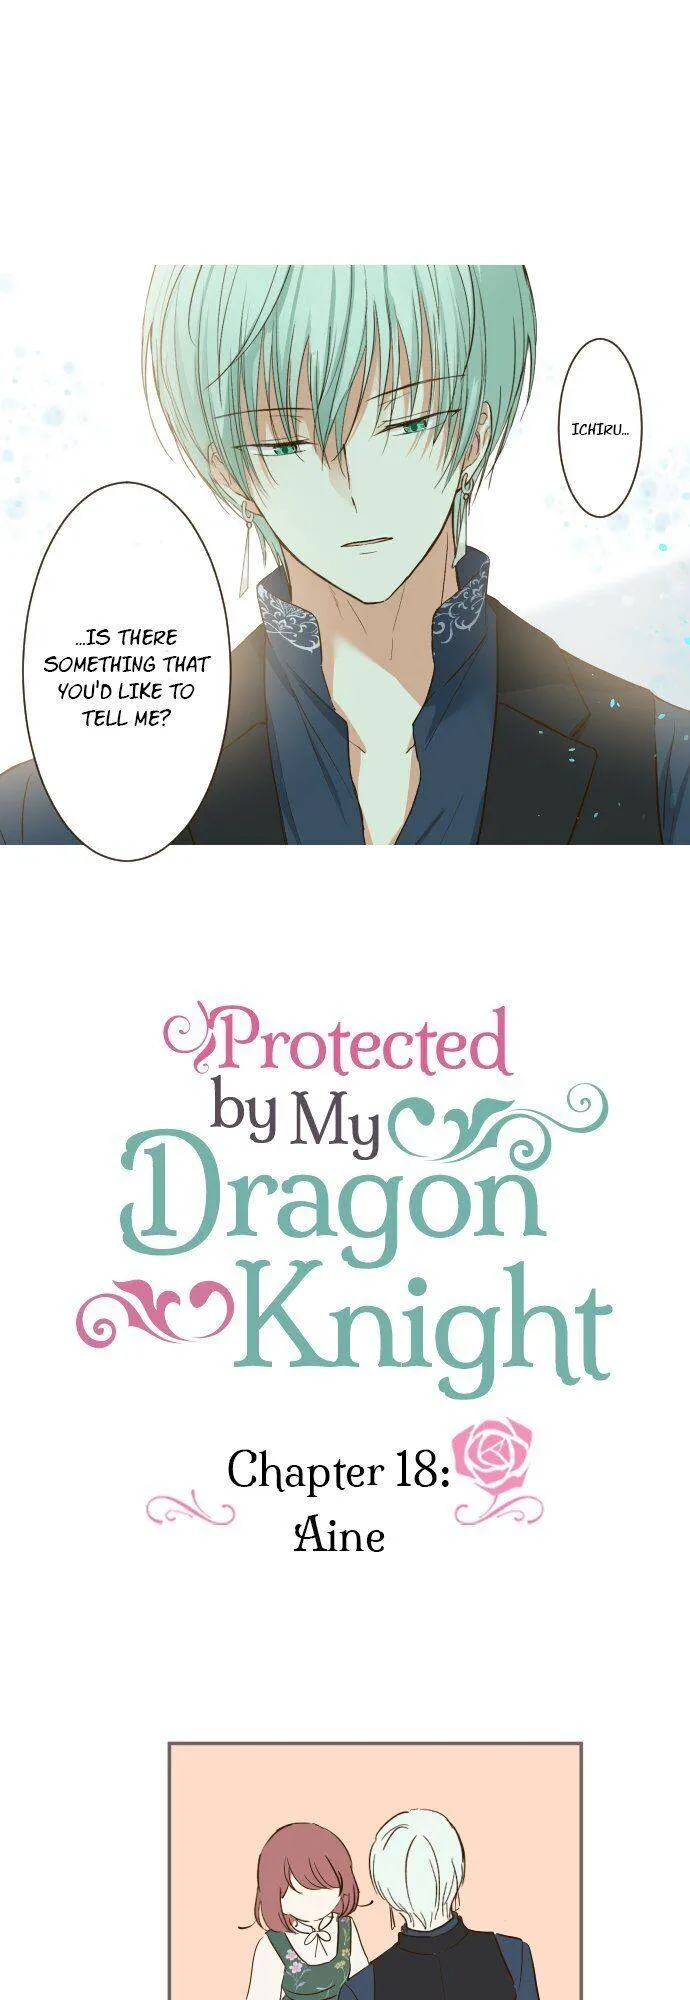 Protected by My Dragon Knight – Coffee Manga